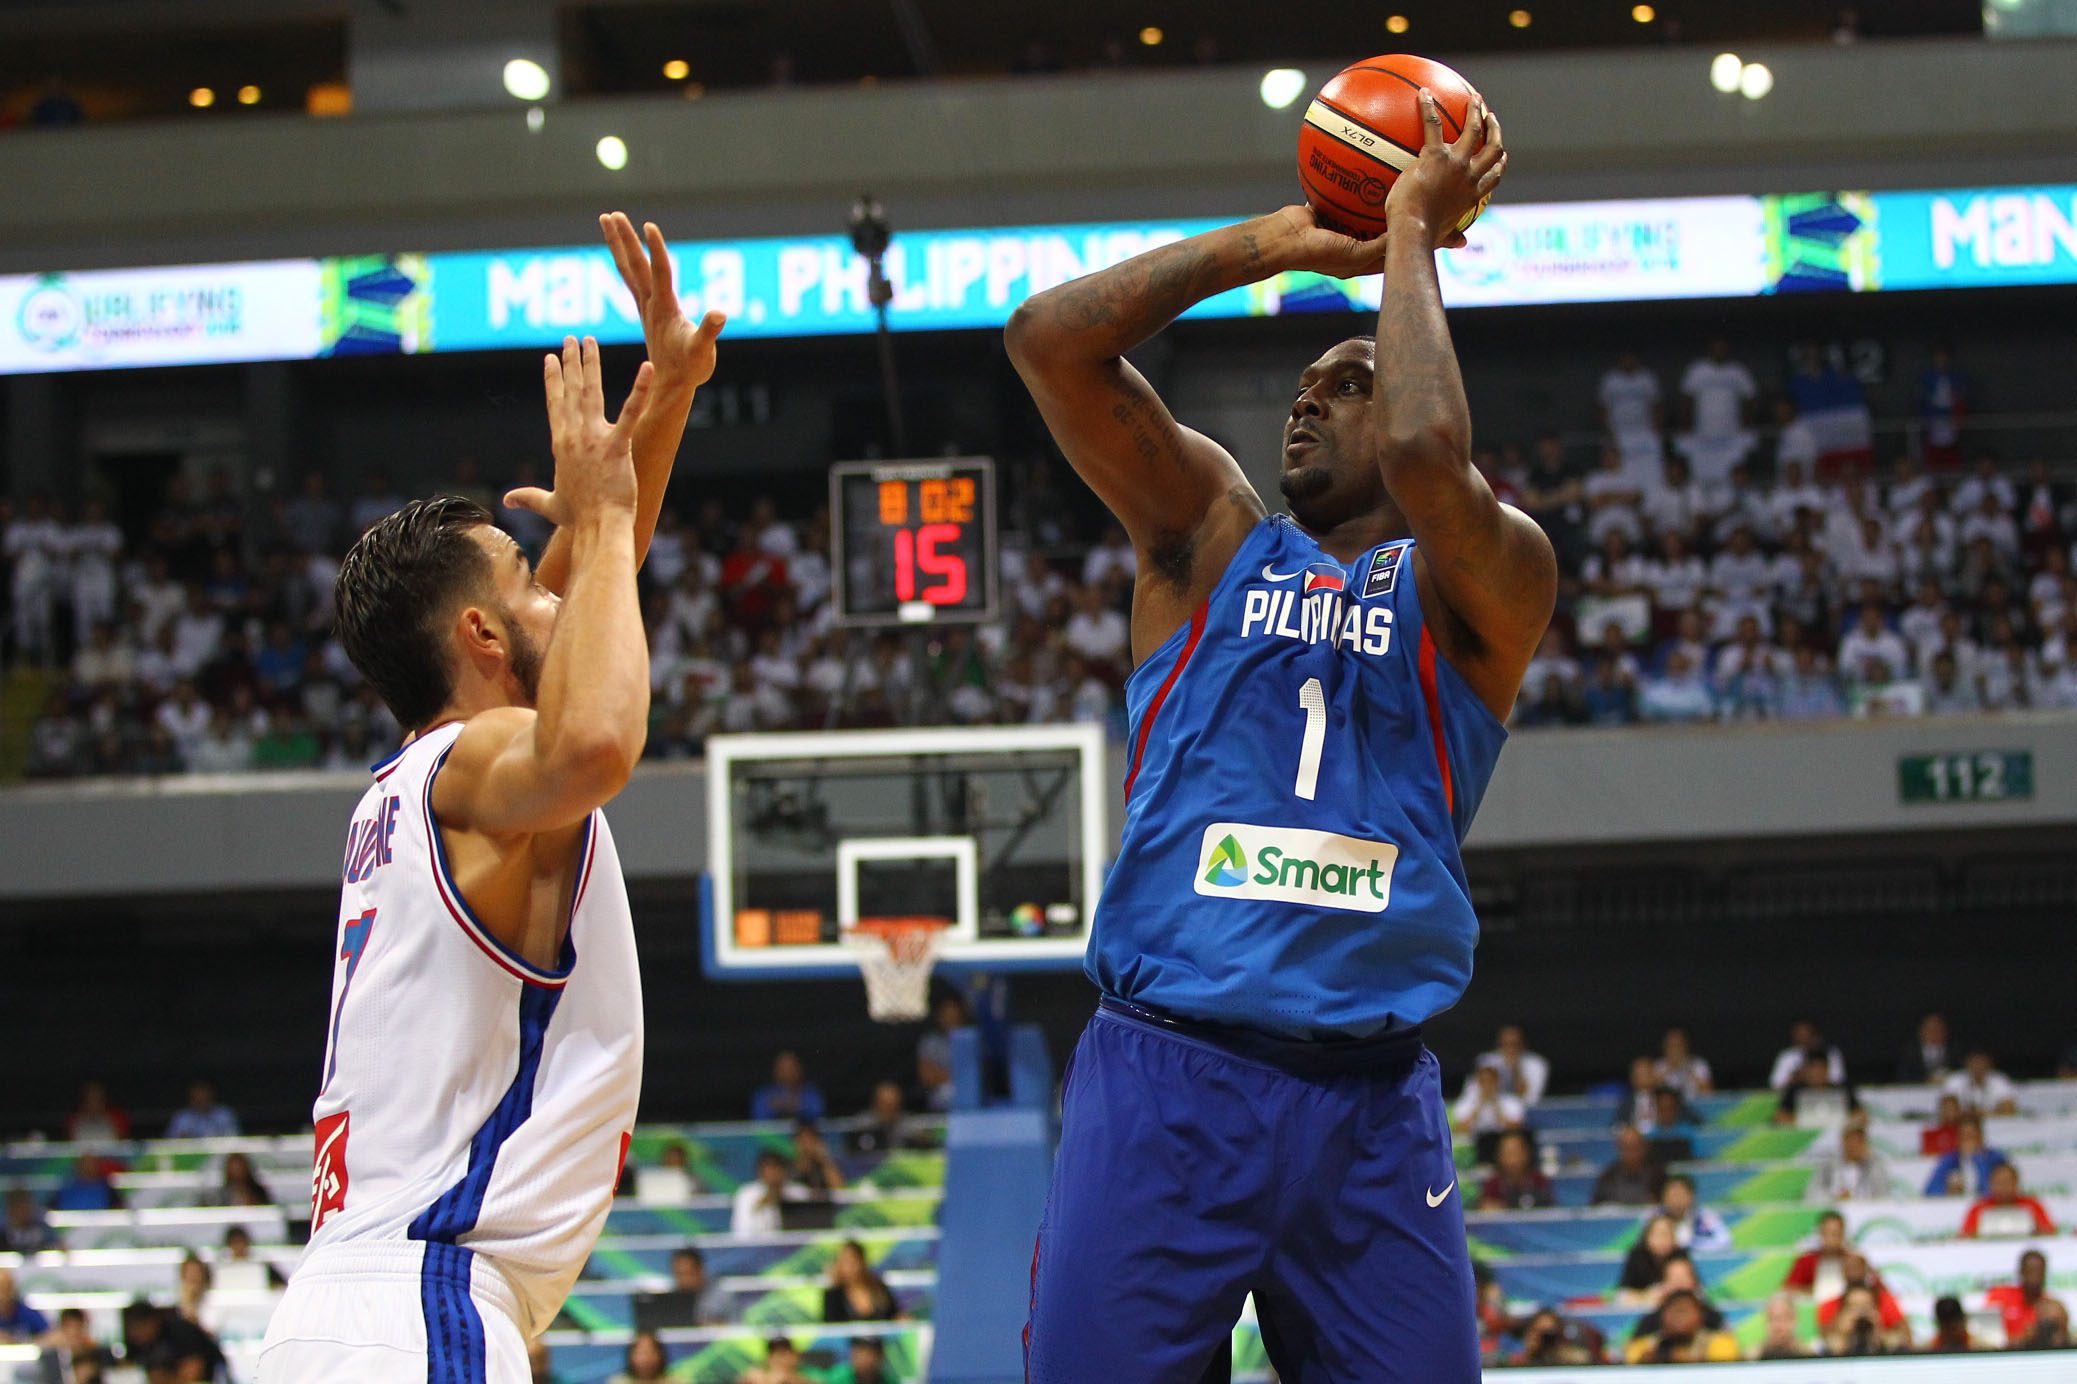 Blatche expected to join Gilas by end of April